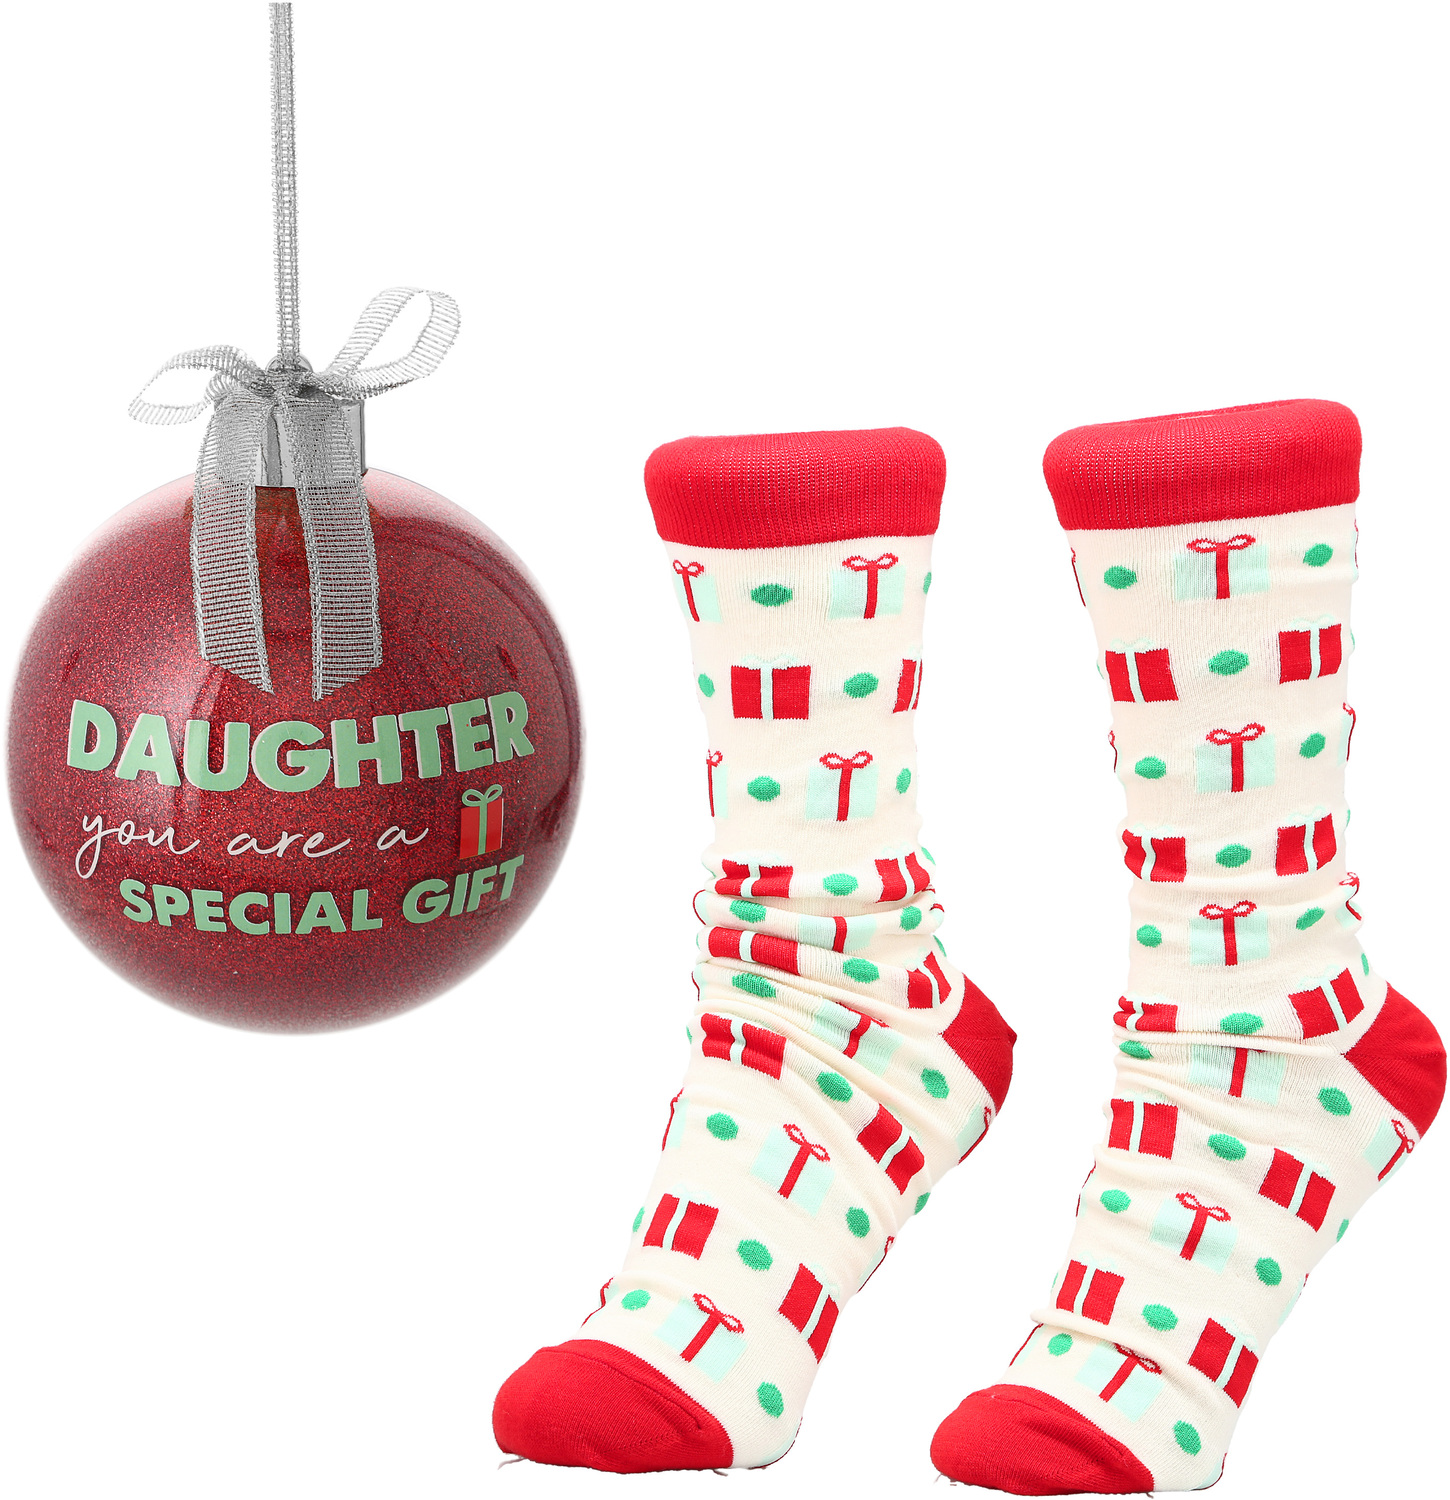 Daughter by Warm & Toe-sty - Daughter - 4" Ornament with Unisex Holiday Socks